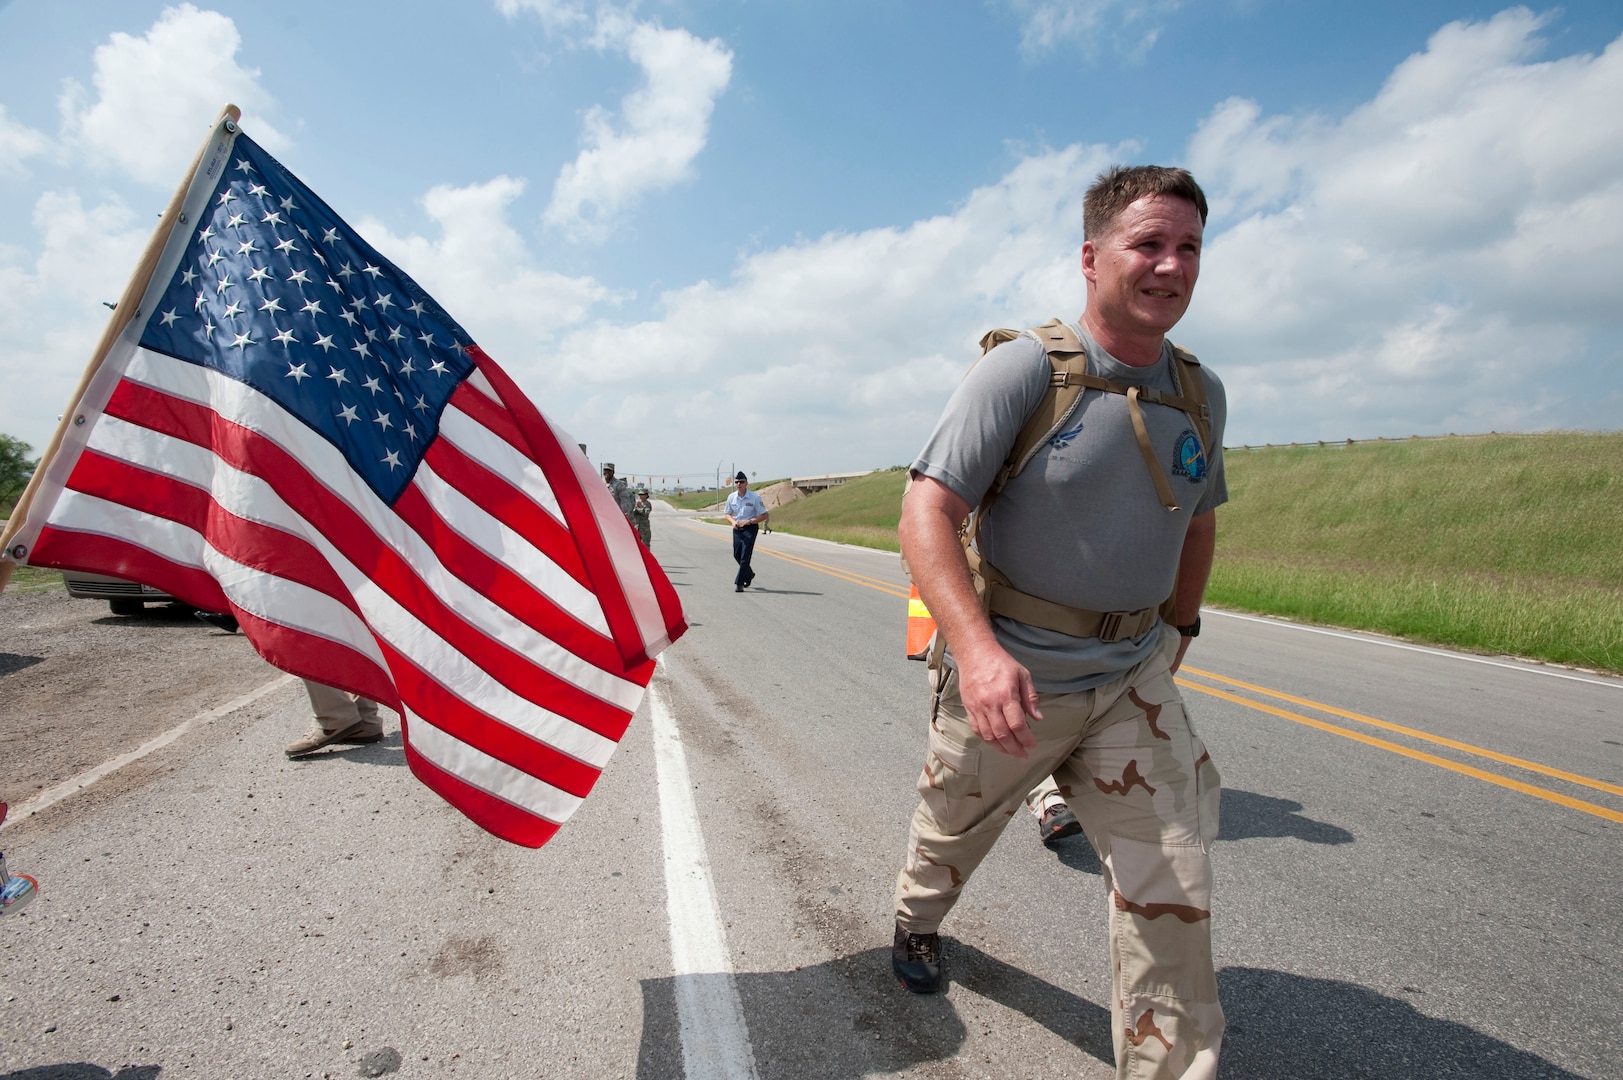 Chief Master Sgt. Tony Travis, a combat controller with the 23rd Special Tactics Squadron at Hurlburt Field, Fla., walks along I-10 near mile marker 587 in Texas. He is participating in the Special Tactics Memorial Ruck to raise awareness and support for the Special Operations Warrior Foundation and recognize fallen comrades of wars in Iraq and Afghanistan. Six, two-man teams will complete their mission in 10 days by walking 10-15 mile legs around the clock while carrying a ruck weighing at least 50 pounds, which is traditionally used in all training marches. (U.S. Air Force photo/Steve Thurow)